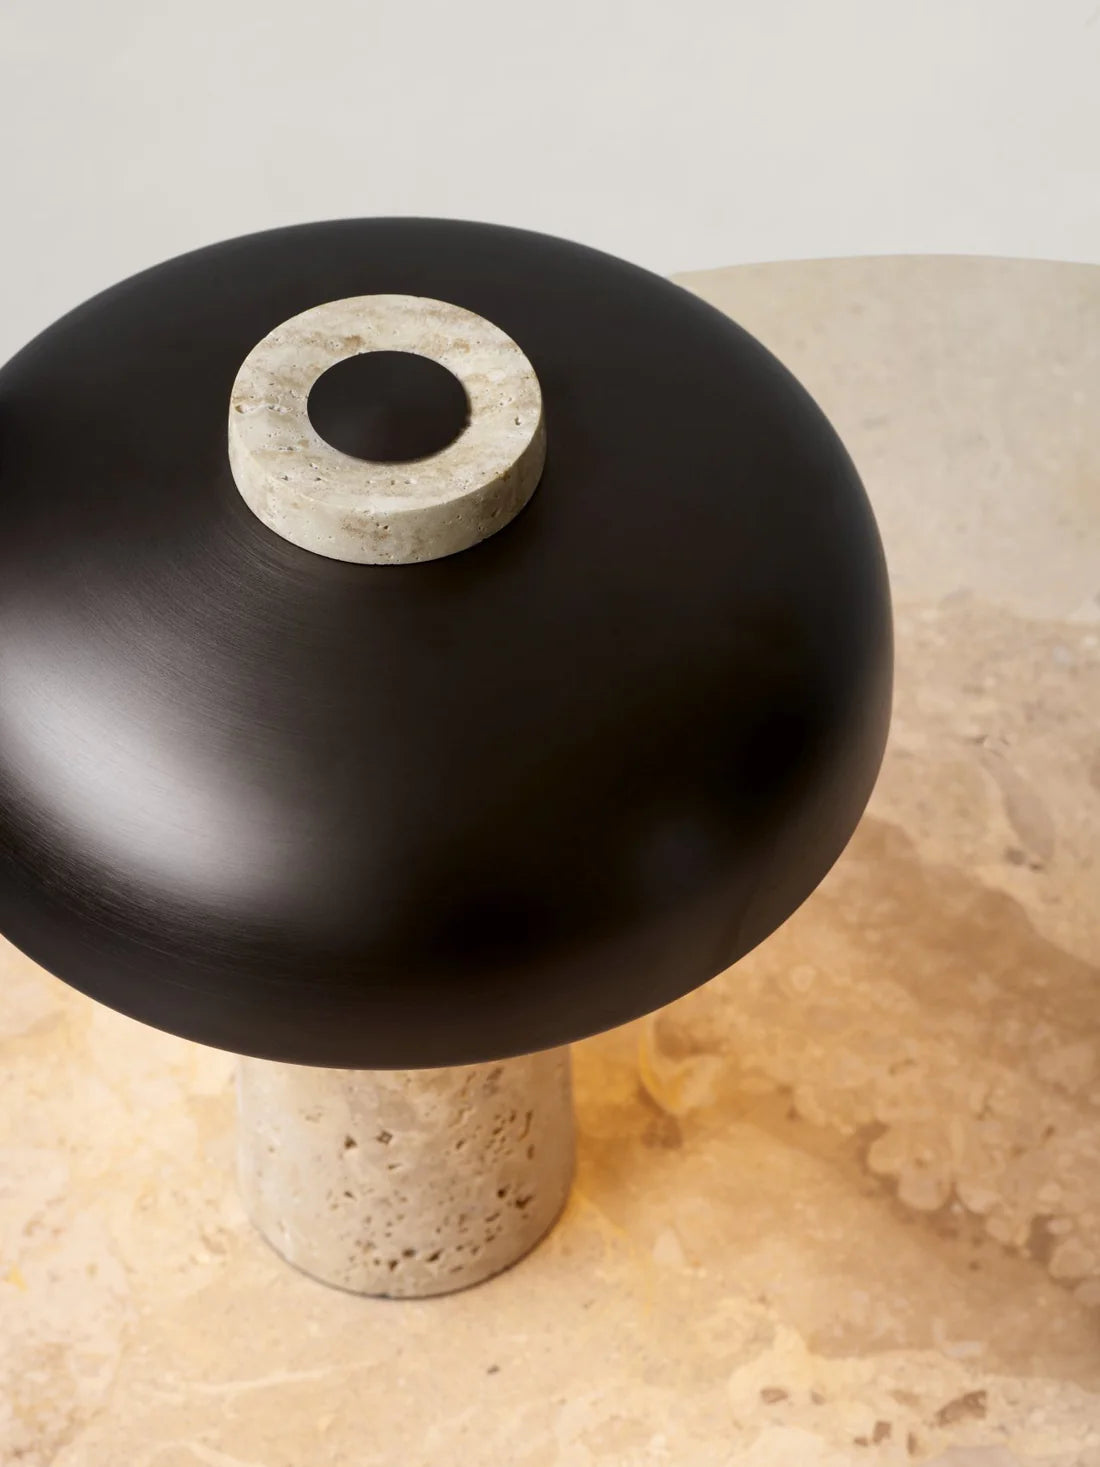 The top of the Reverse Table Lamp from Audo Copenhagen